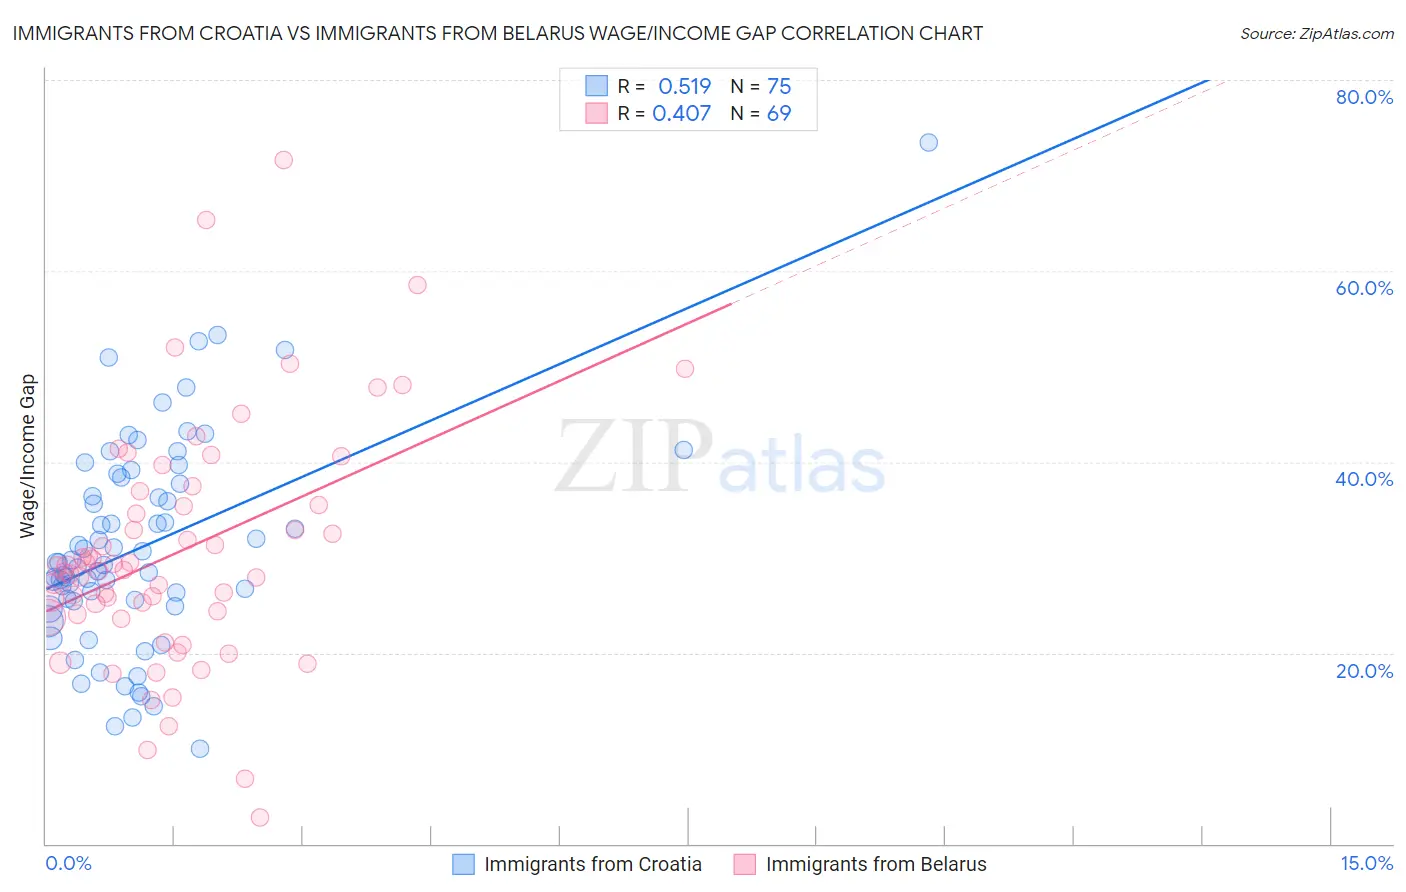 Immigrants from Croatia vs Immigrants from Belarus Wage/Income Gap